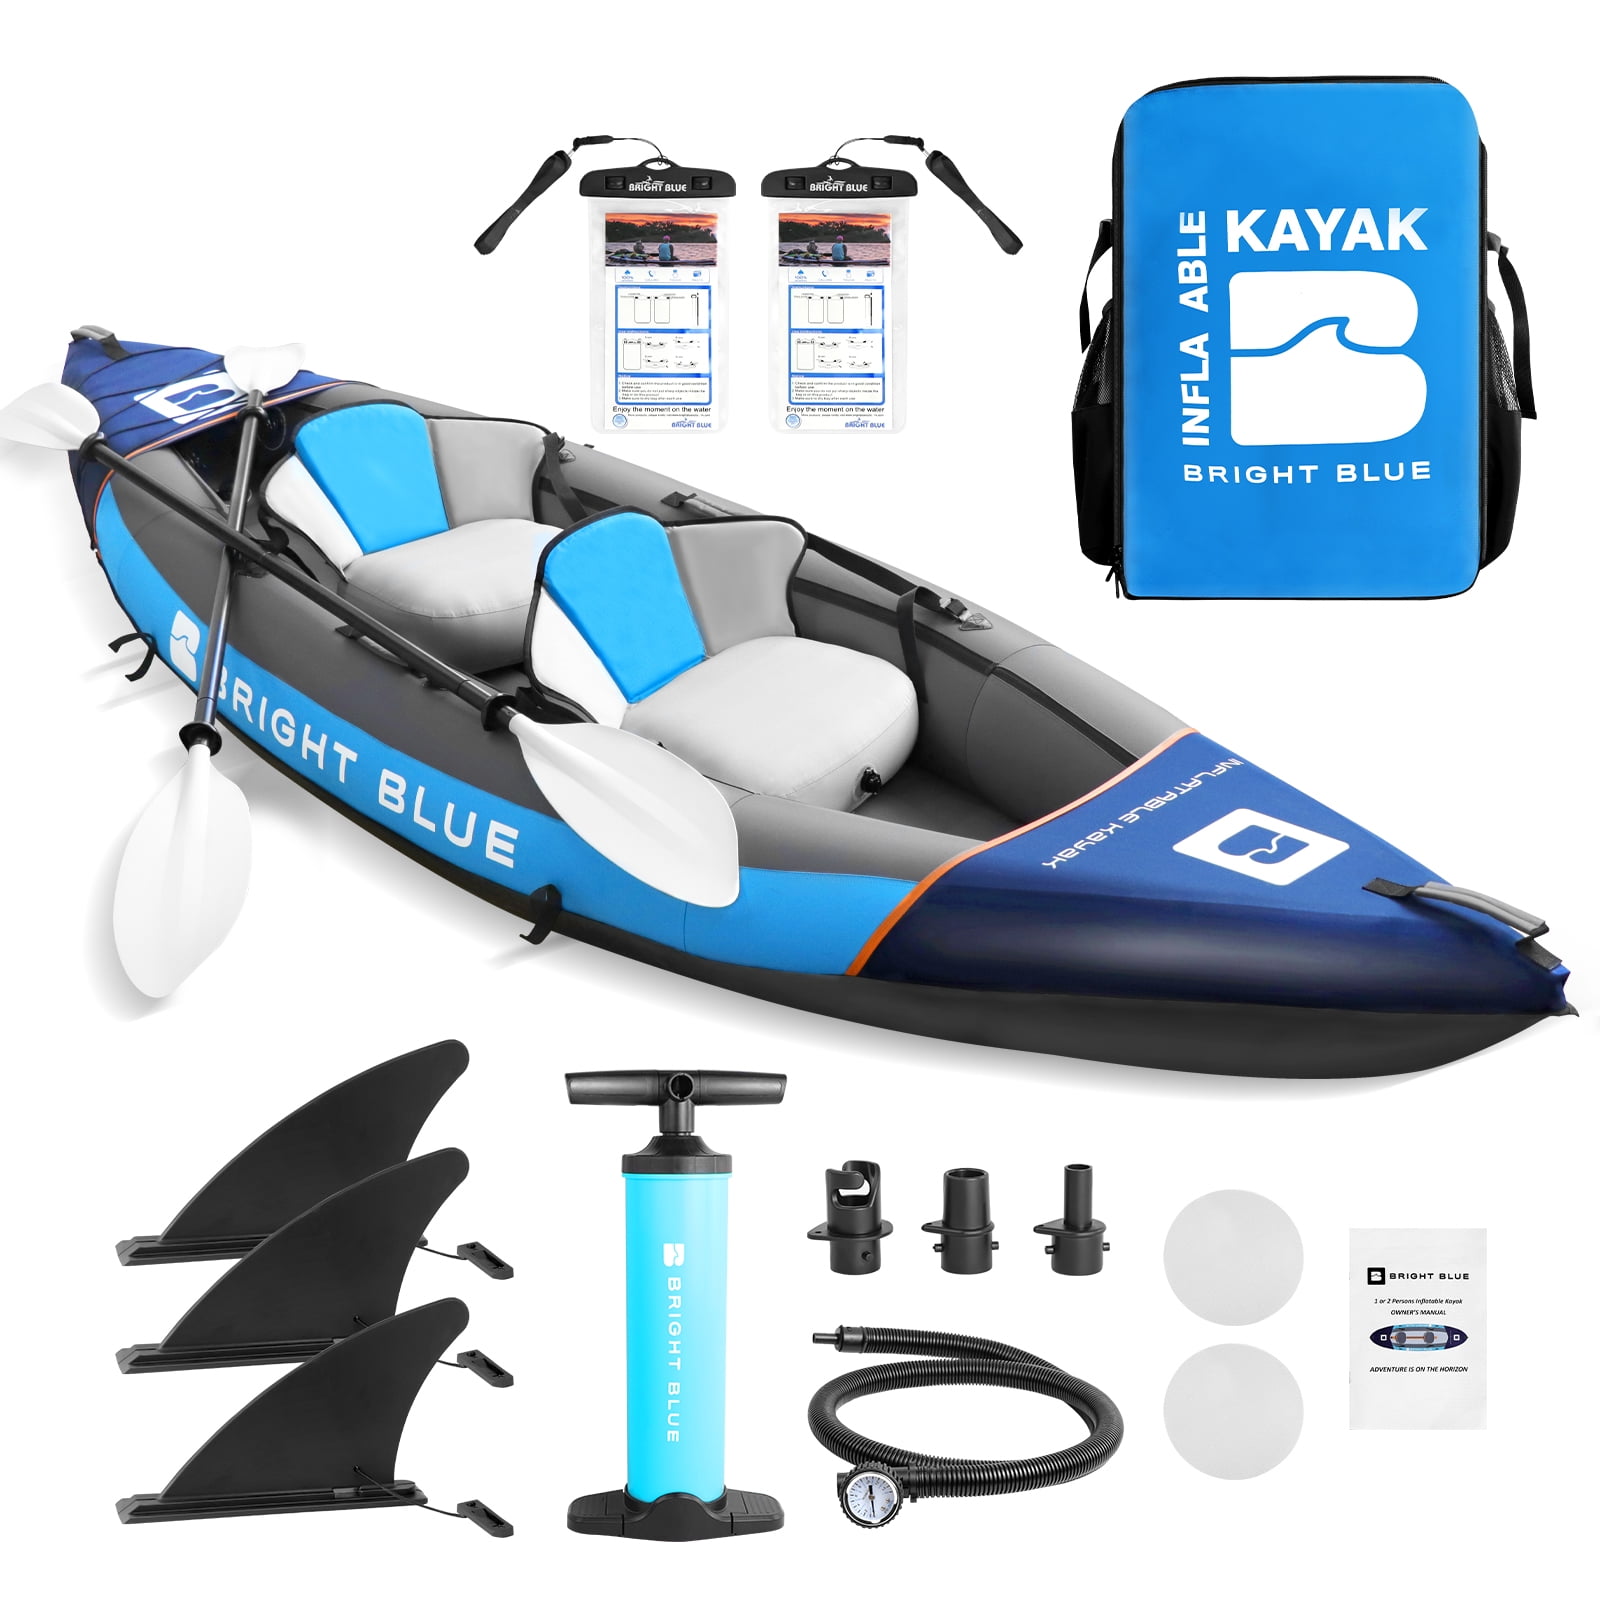 Brizi Living 2 Person Inflatable Kayak for Adults,Inflatable